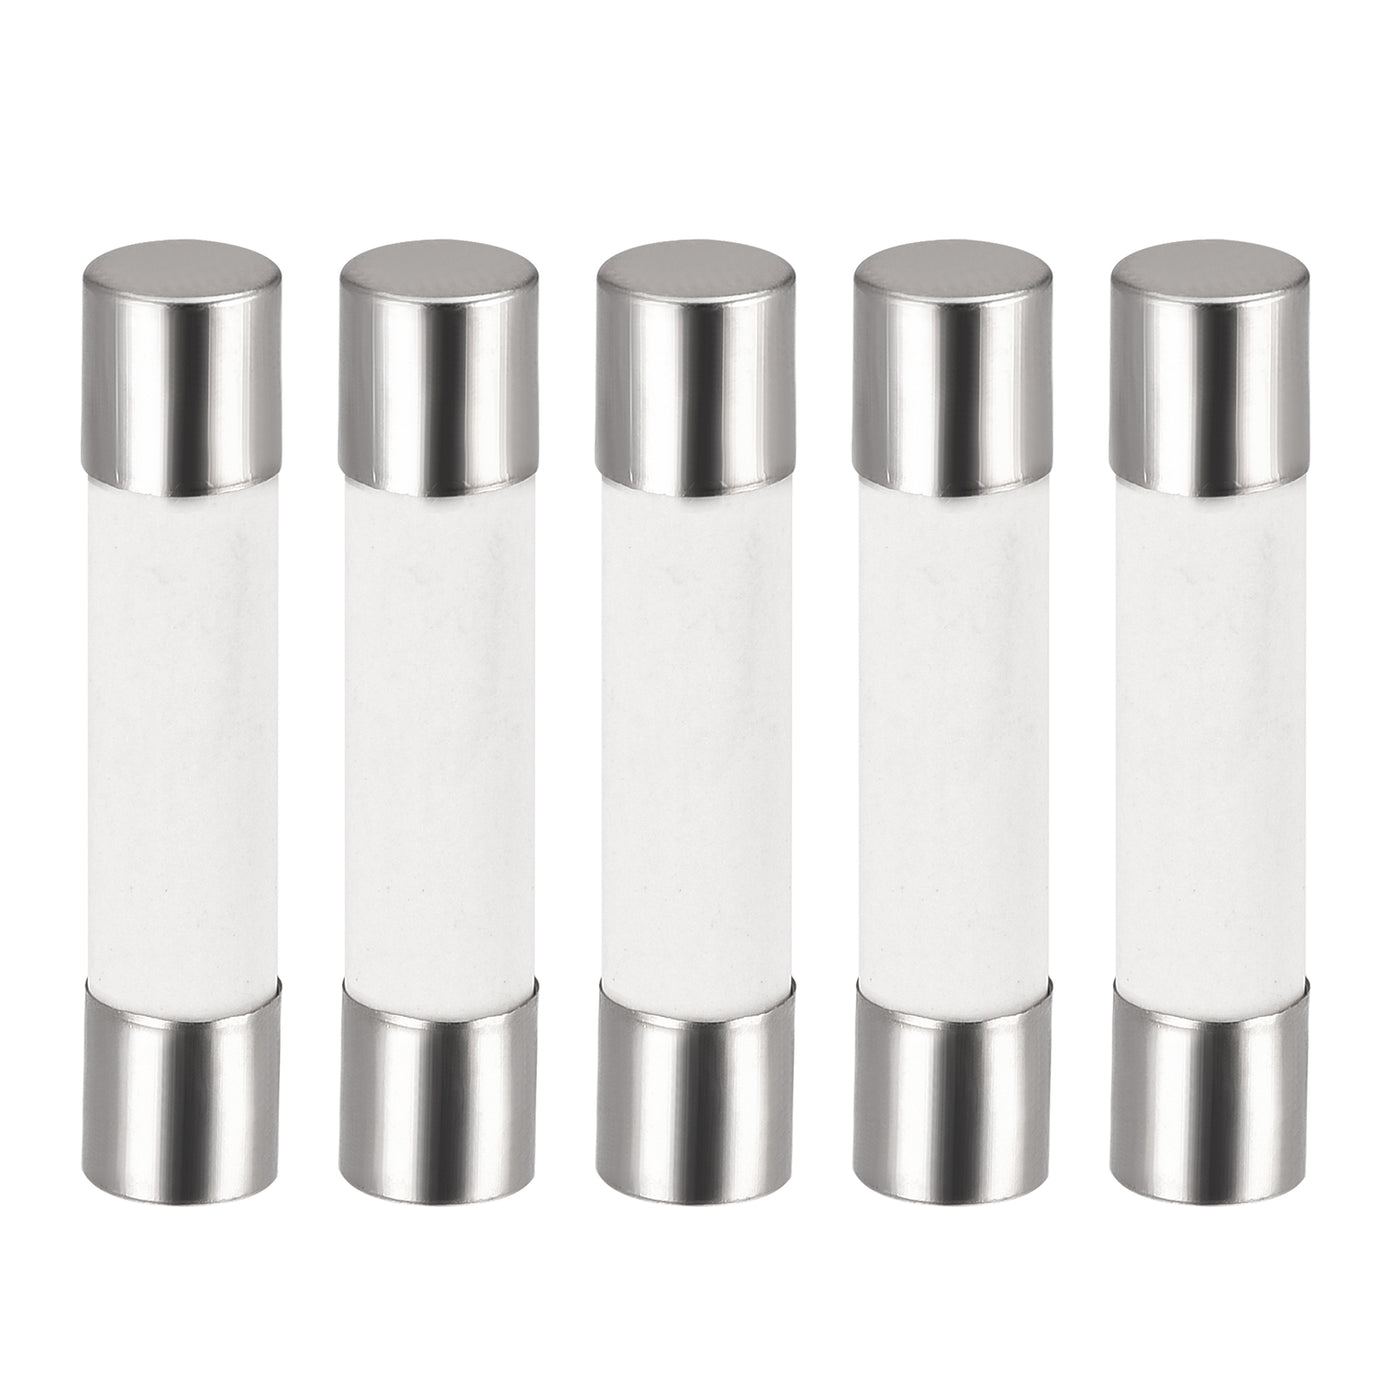 uxcell Uxcell Ceramic Cartridge Fuses 6.3A 250V 6x30mm Fast Blow for Energy Saving Lamp 5pcs